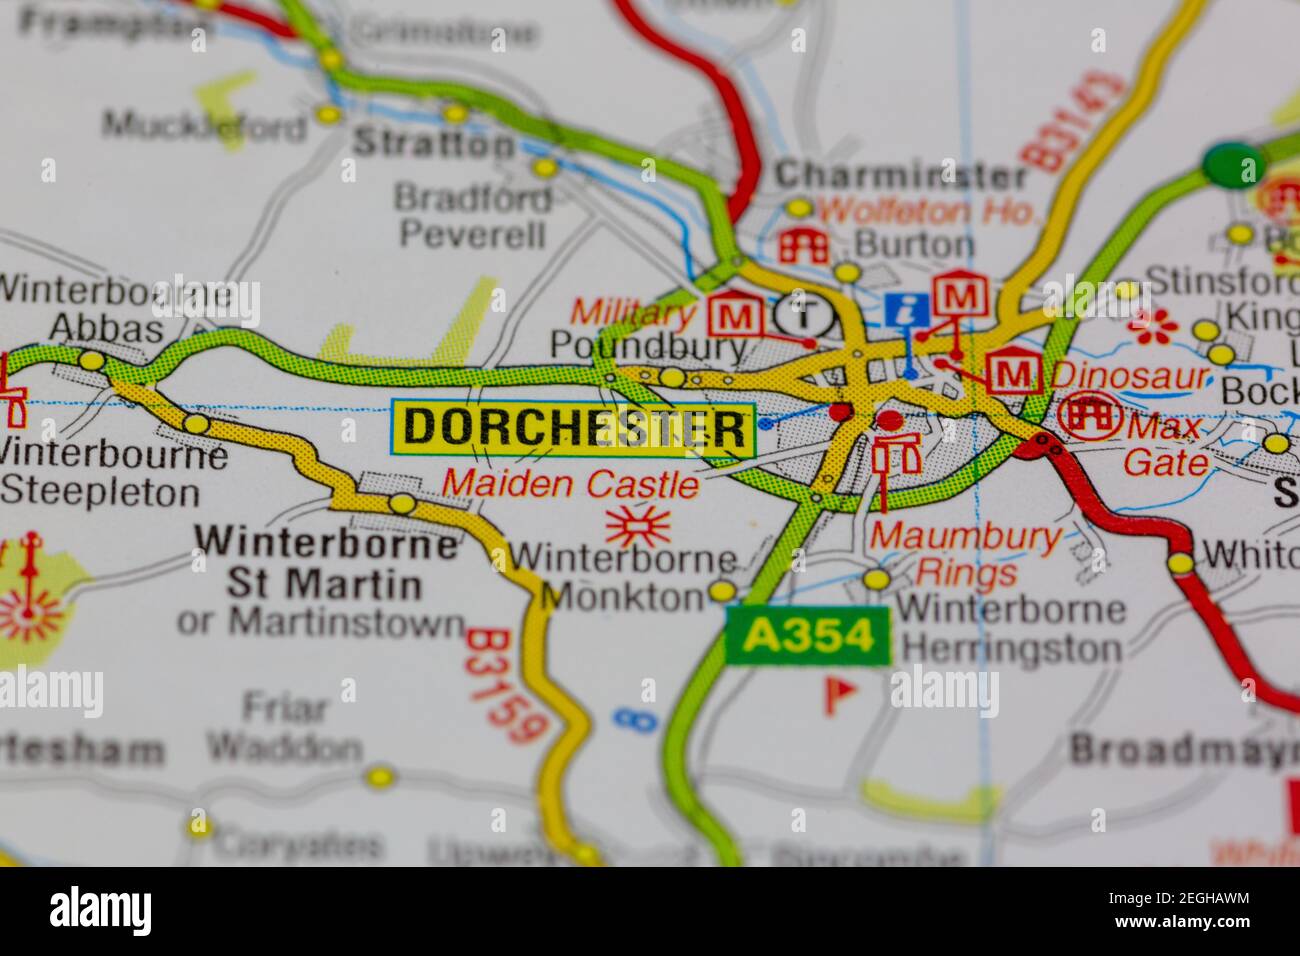 Dorchester and surrounding areas shown on a road map or geography map Stock Photo